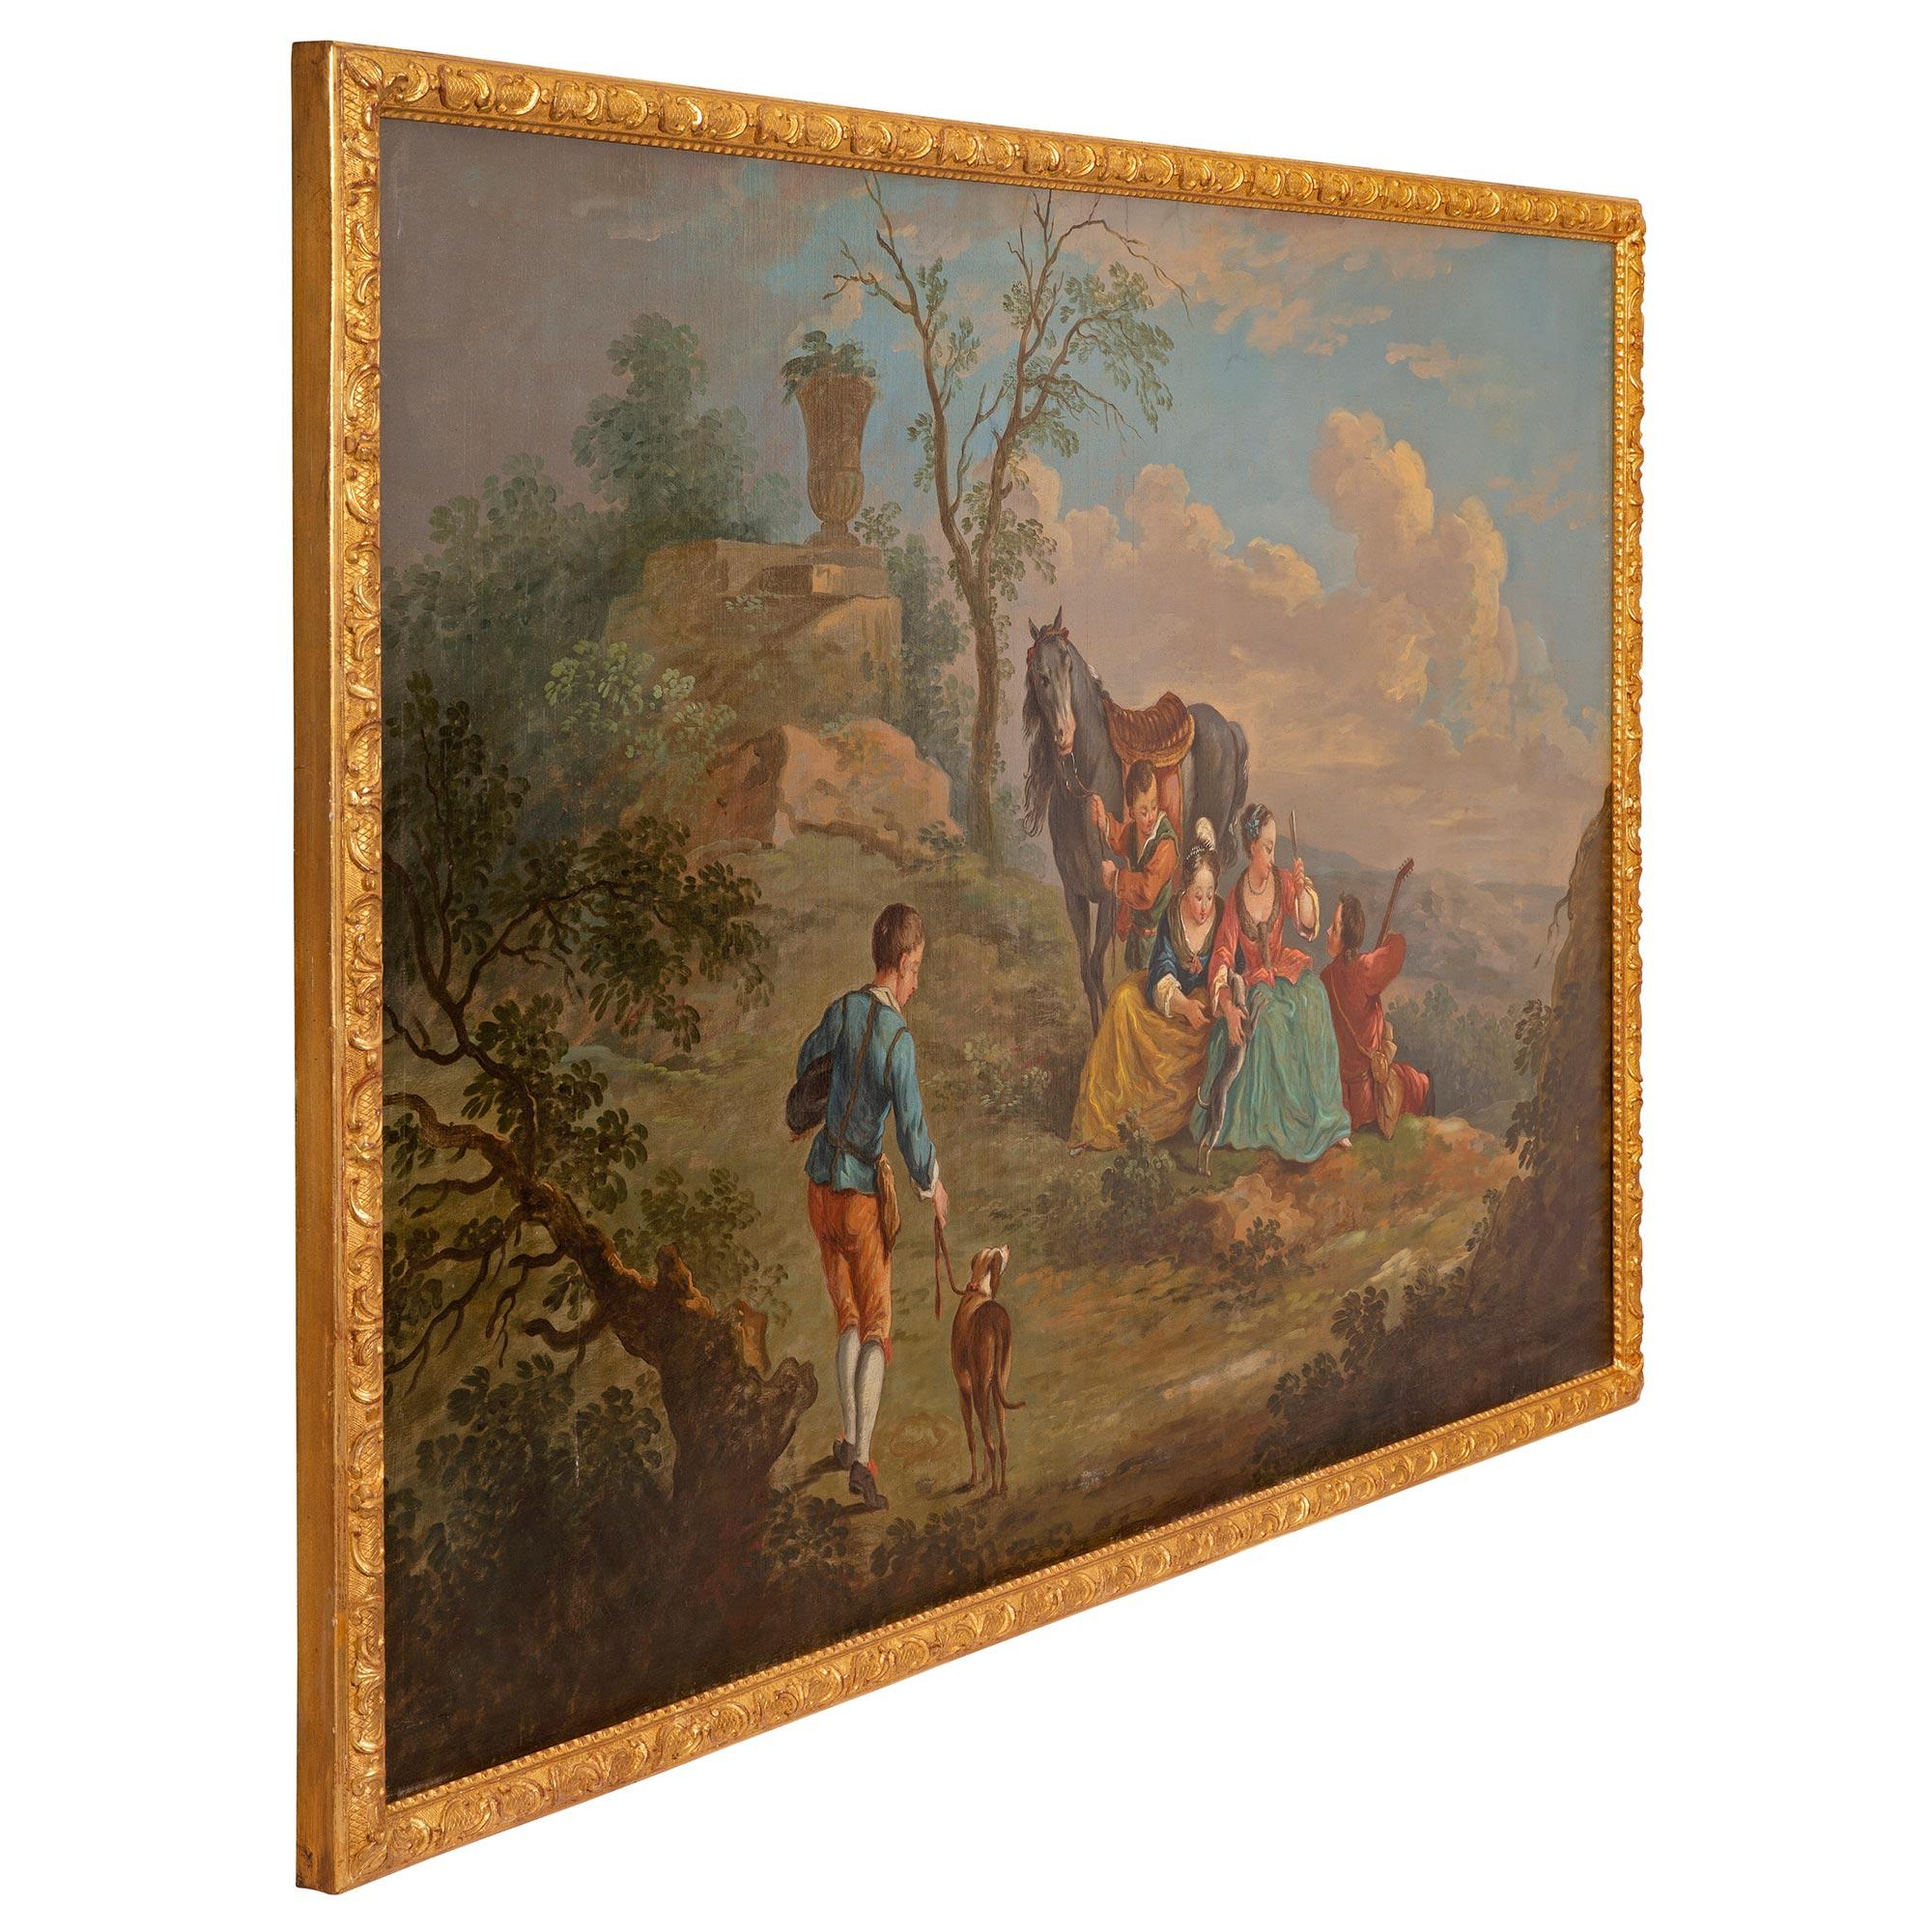 A striking and most charming pair of continental 19th century oil on canvas paintings. Each beautiful painting is set within its original giltwood frame with finely carved wrap around beaded and foliate designs. The painting to the left depicts